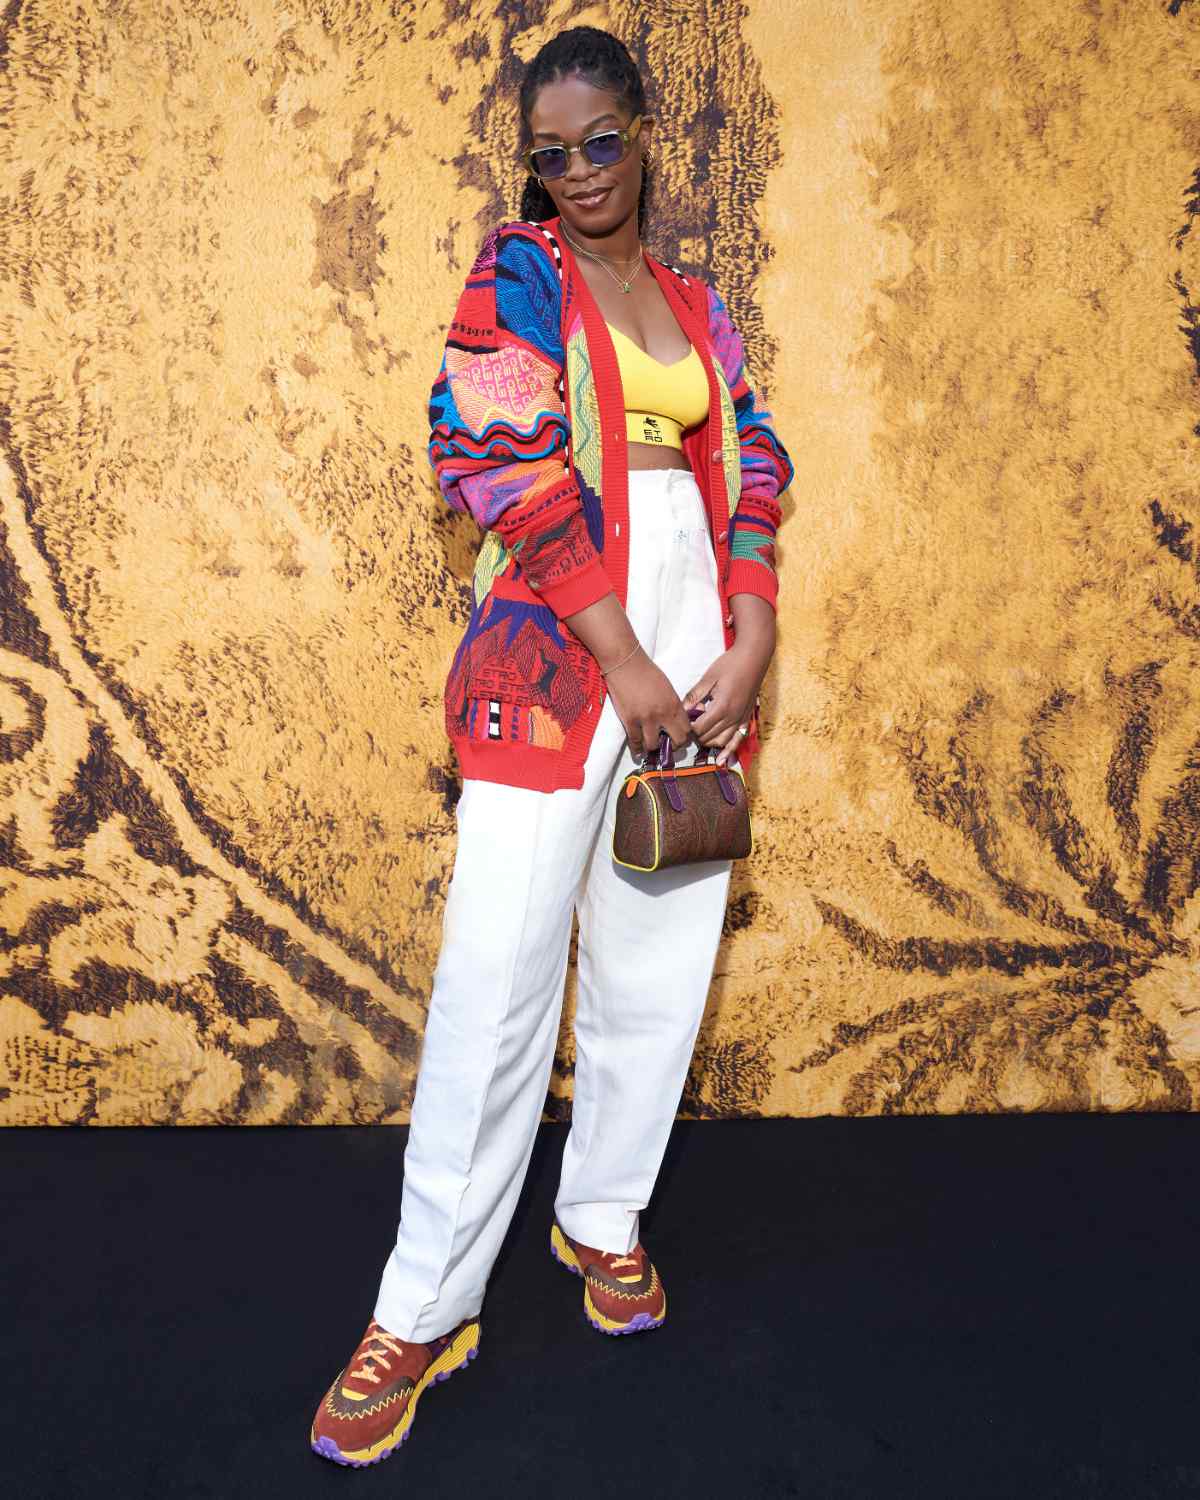 Etro Women's Fall Winter 2022/23 Collection: Show Guests